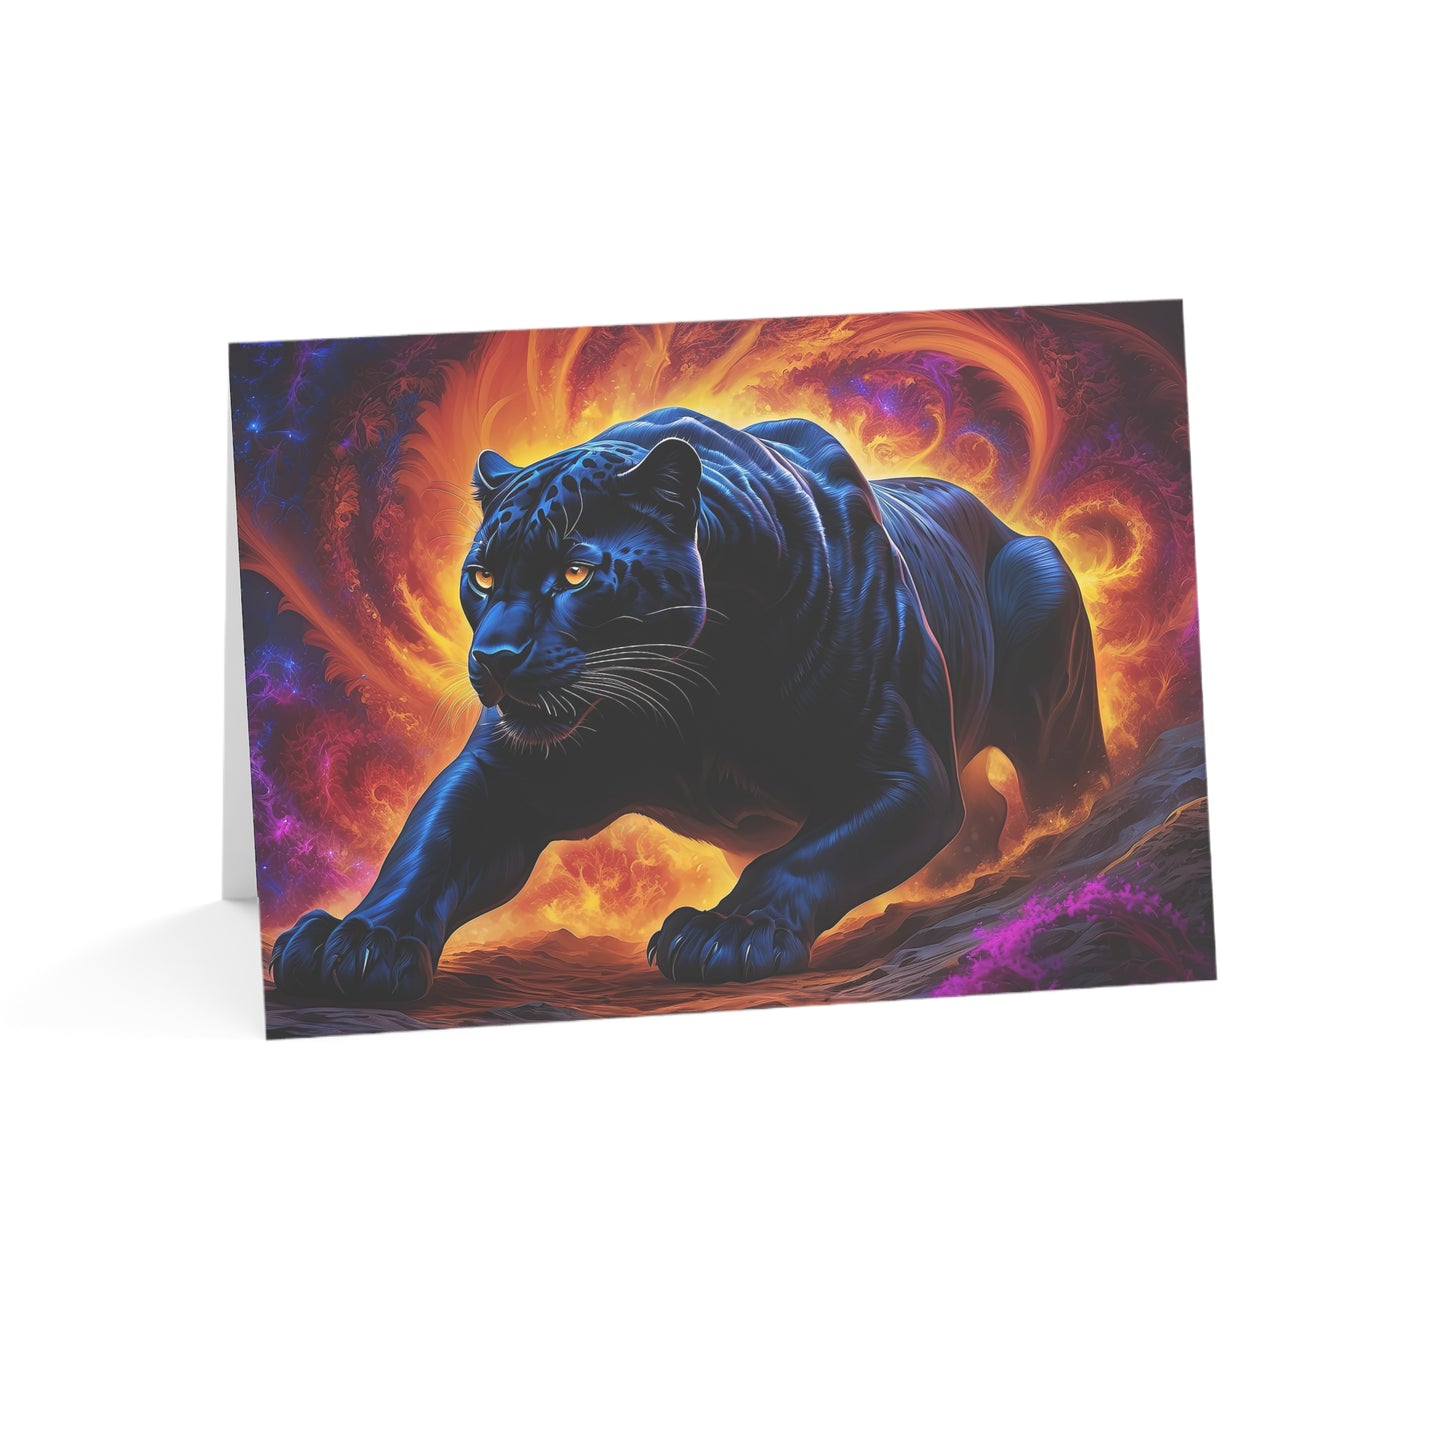 Panther's Gaze: Greeting Cards Collection (1, 10, 30, and 50pcs)